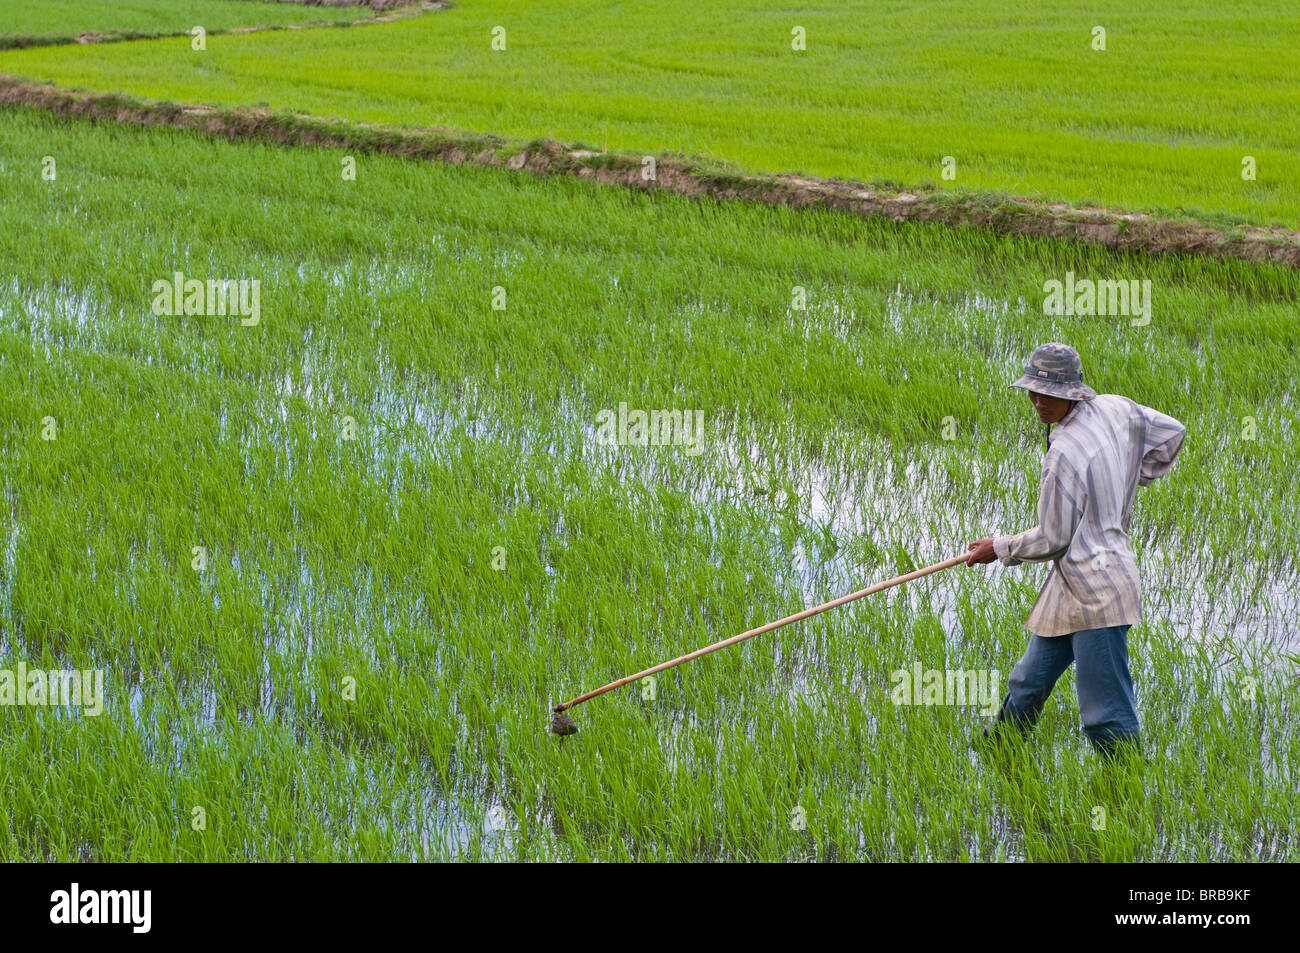 Man in a rice paddy, Vietnam, Indochina, Southeast Asia, Asia Stock Photo